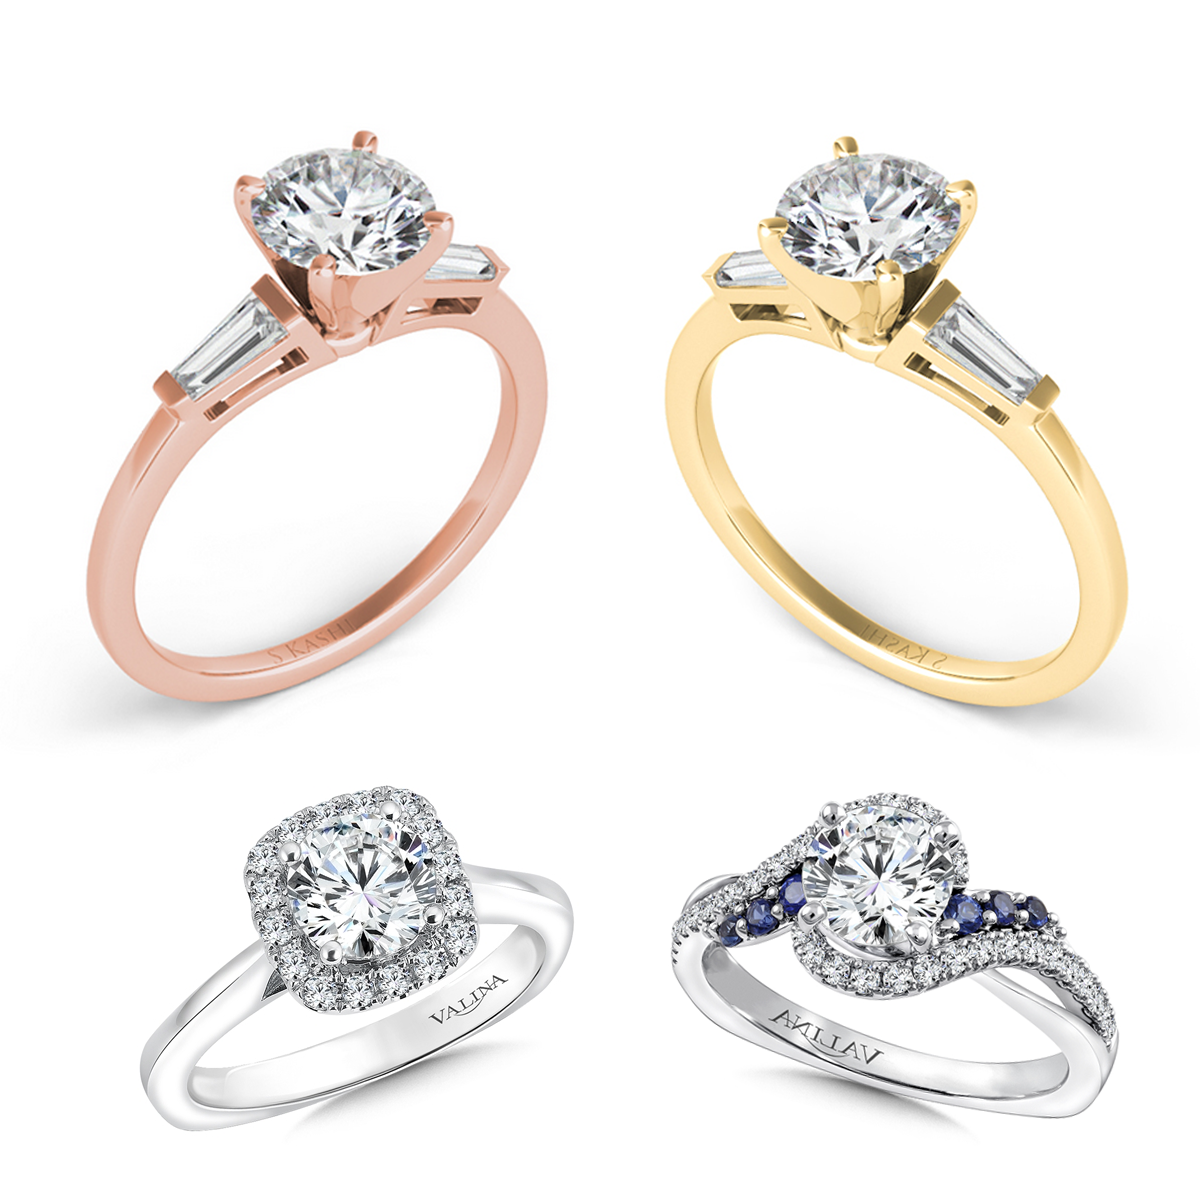 Gorgeous Engagement Rings at Krieger Jewelers